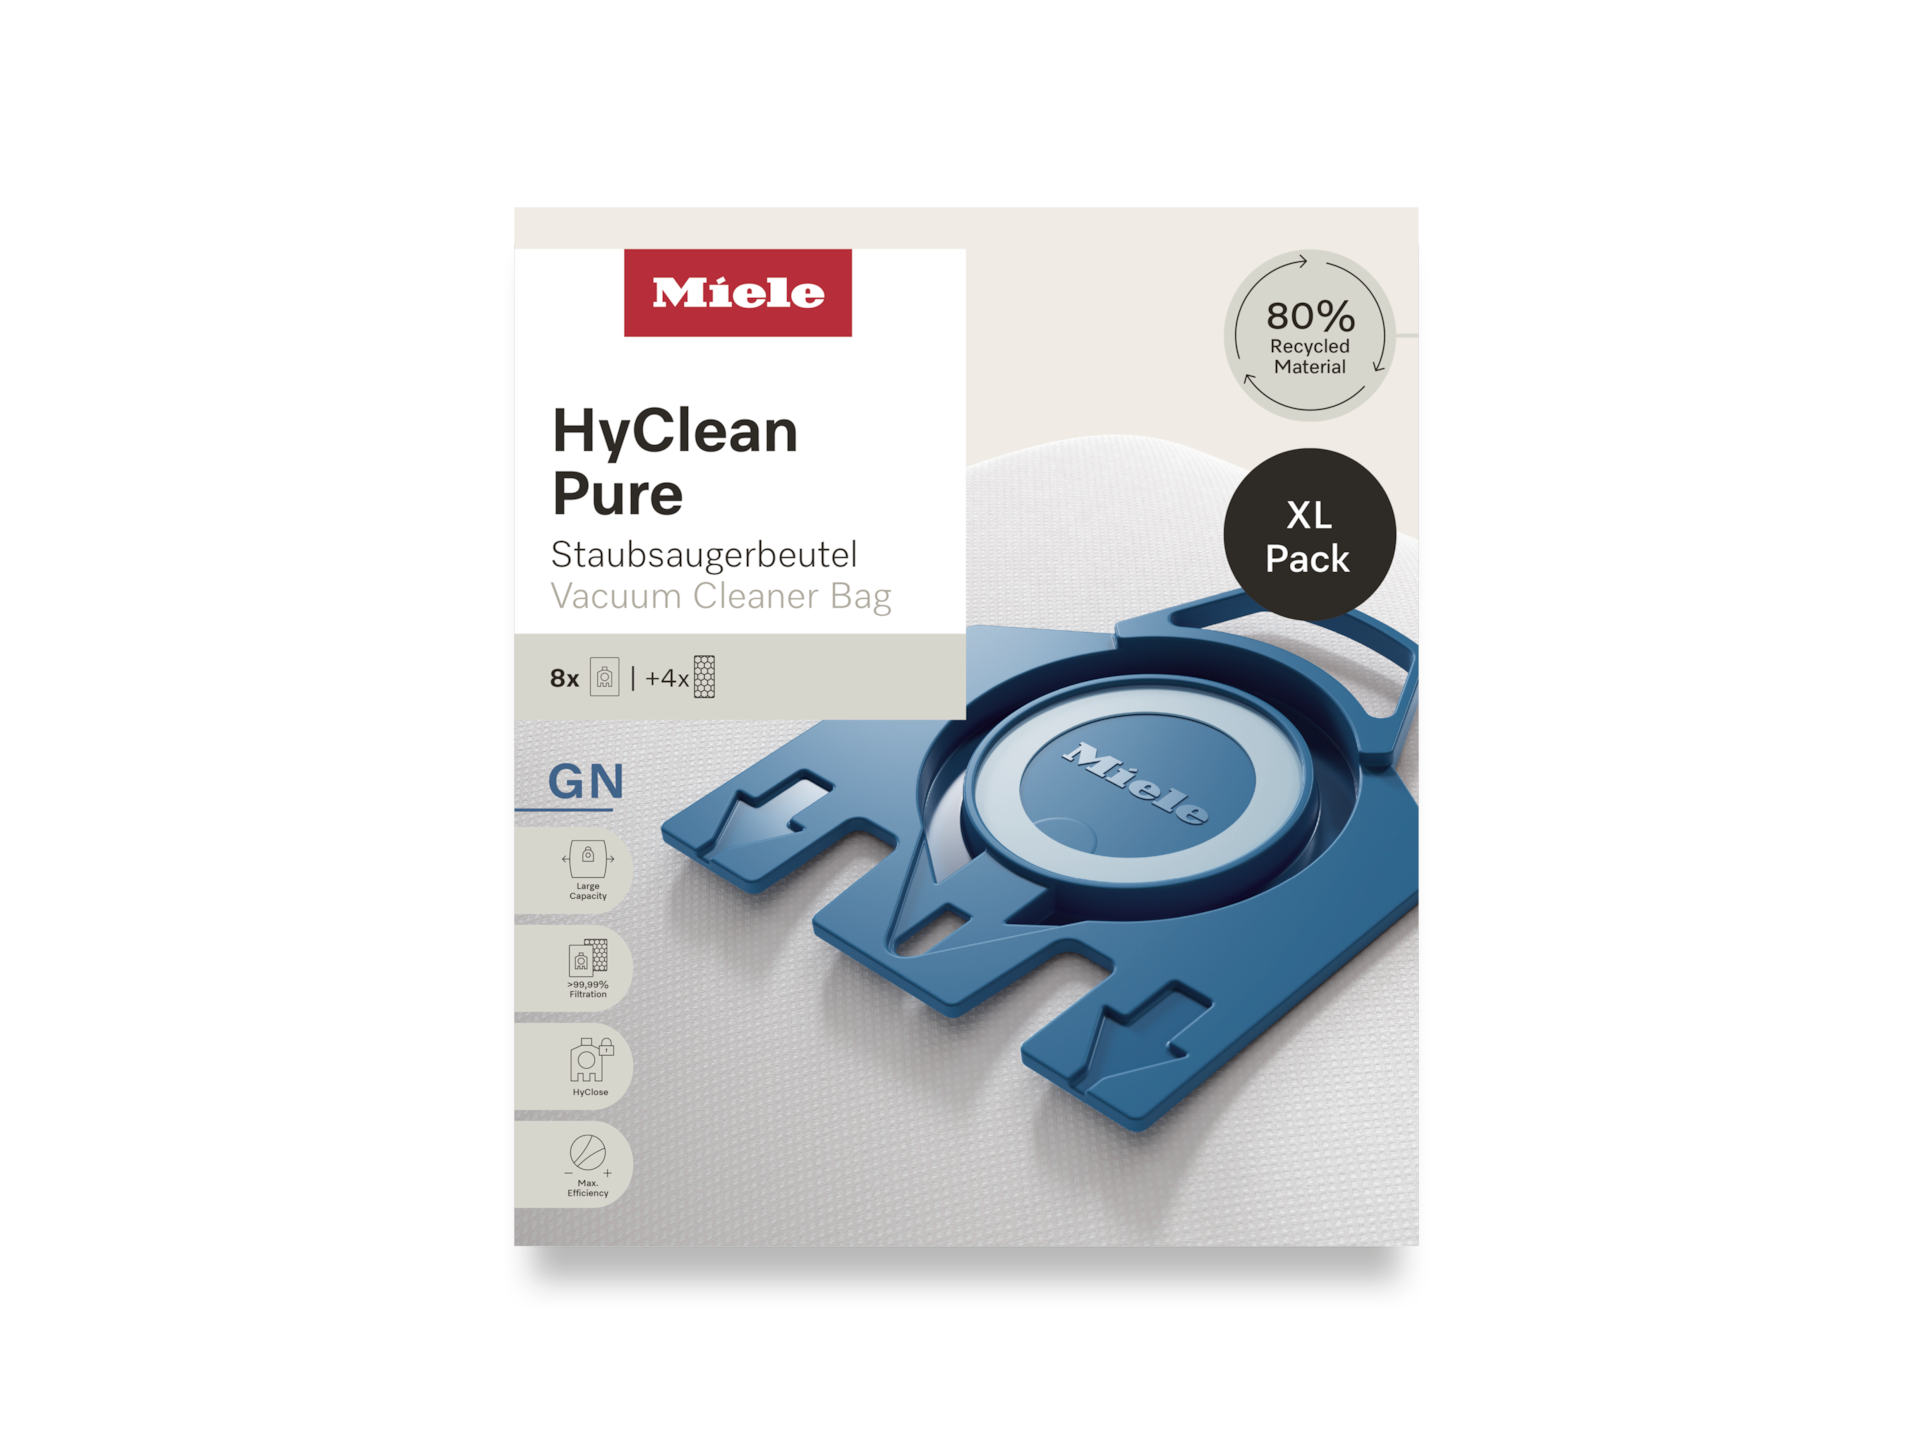 Accesorios - GN XL HyClean Pure - 1